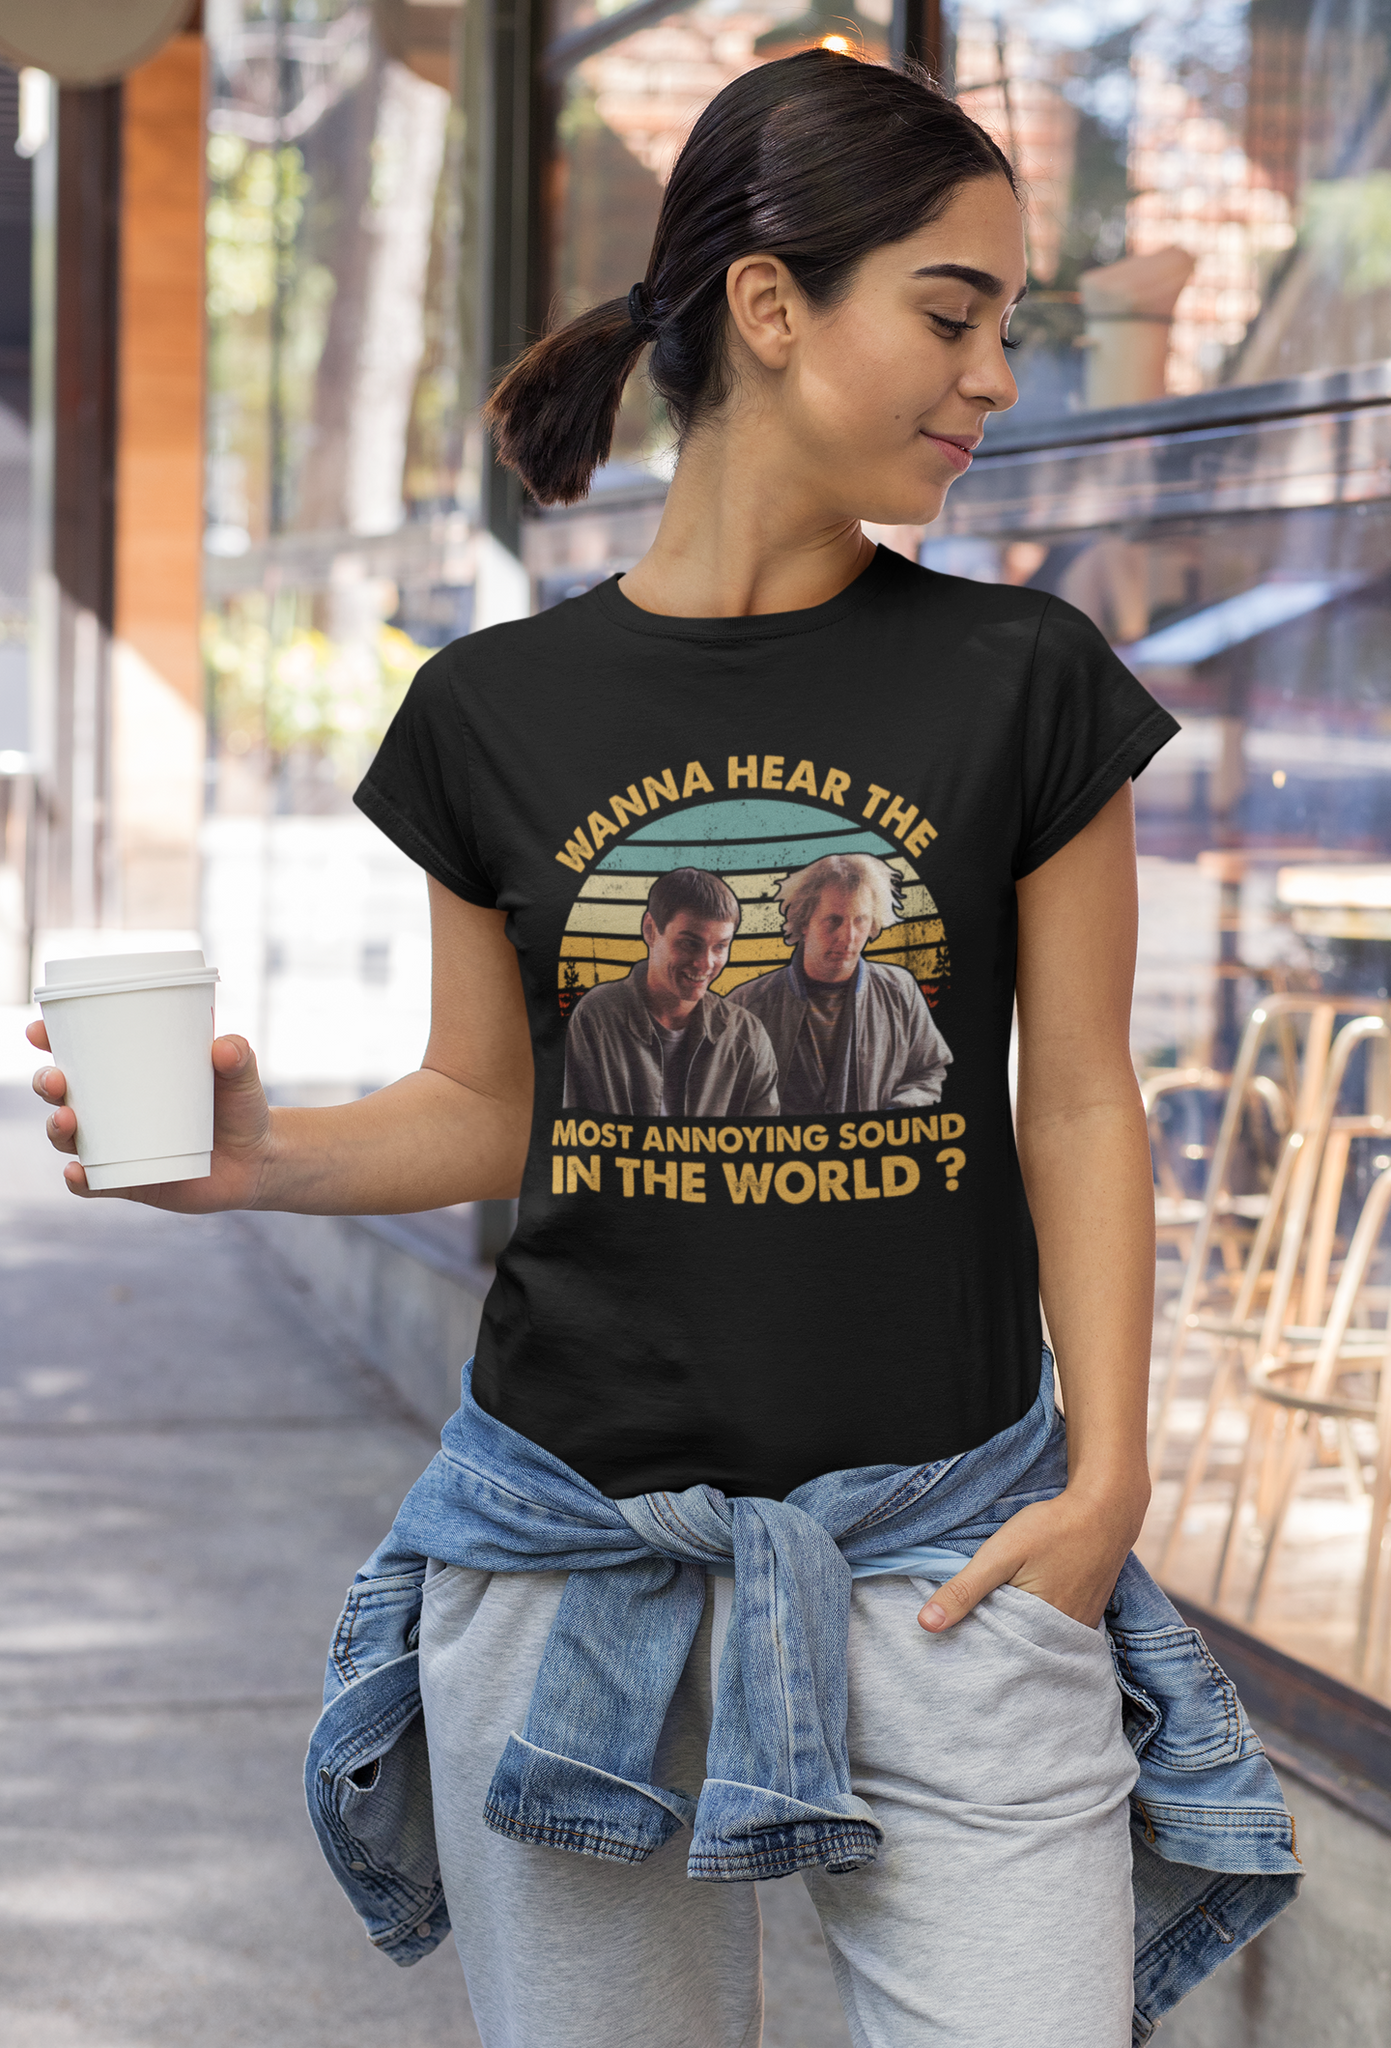 Dumb And Dumber Vintage T Shirt, Lloyd Harry T Shirt, Wanna Hear The Most Annoying Sound In The World Tshirt